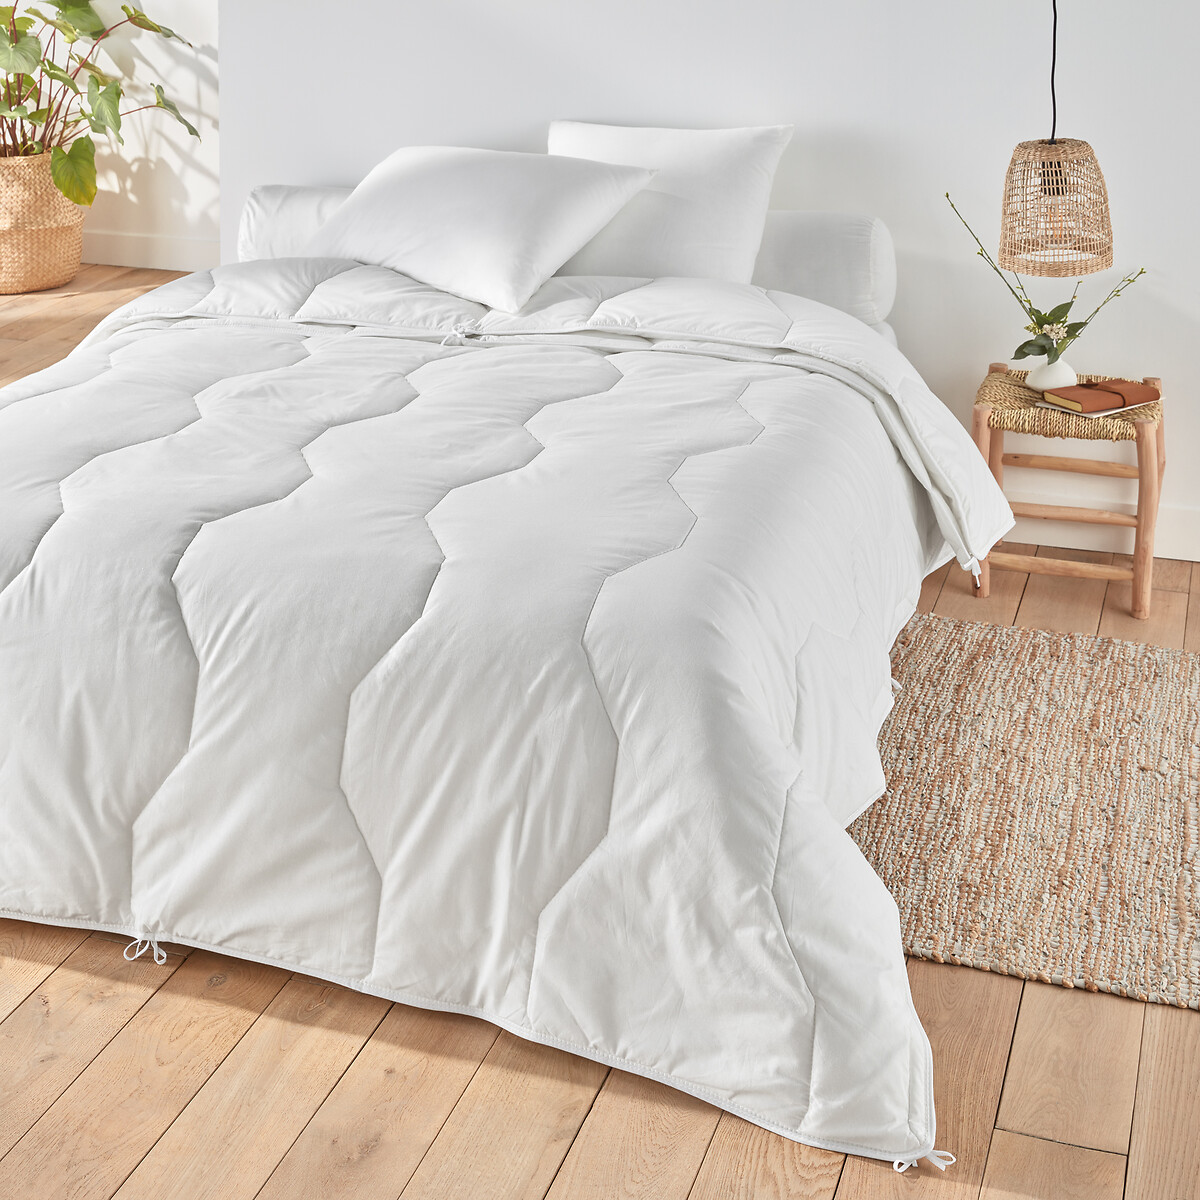 4-Season Synthetic Duvet with Organic Cotton Cover